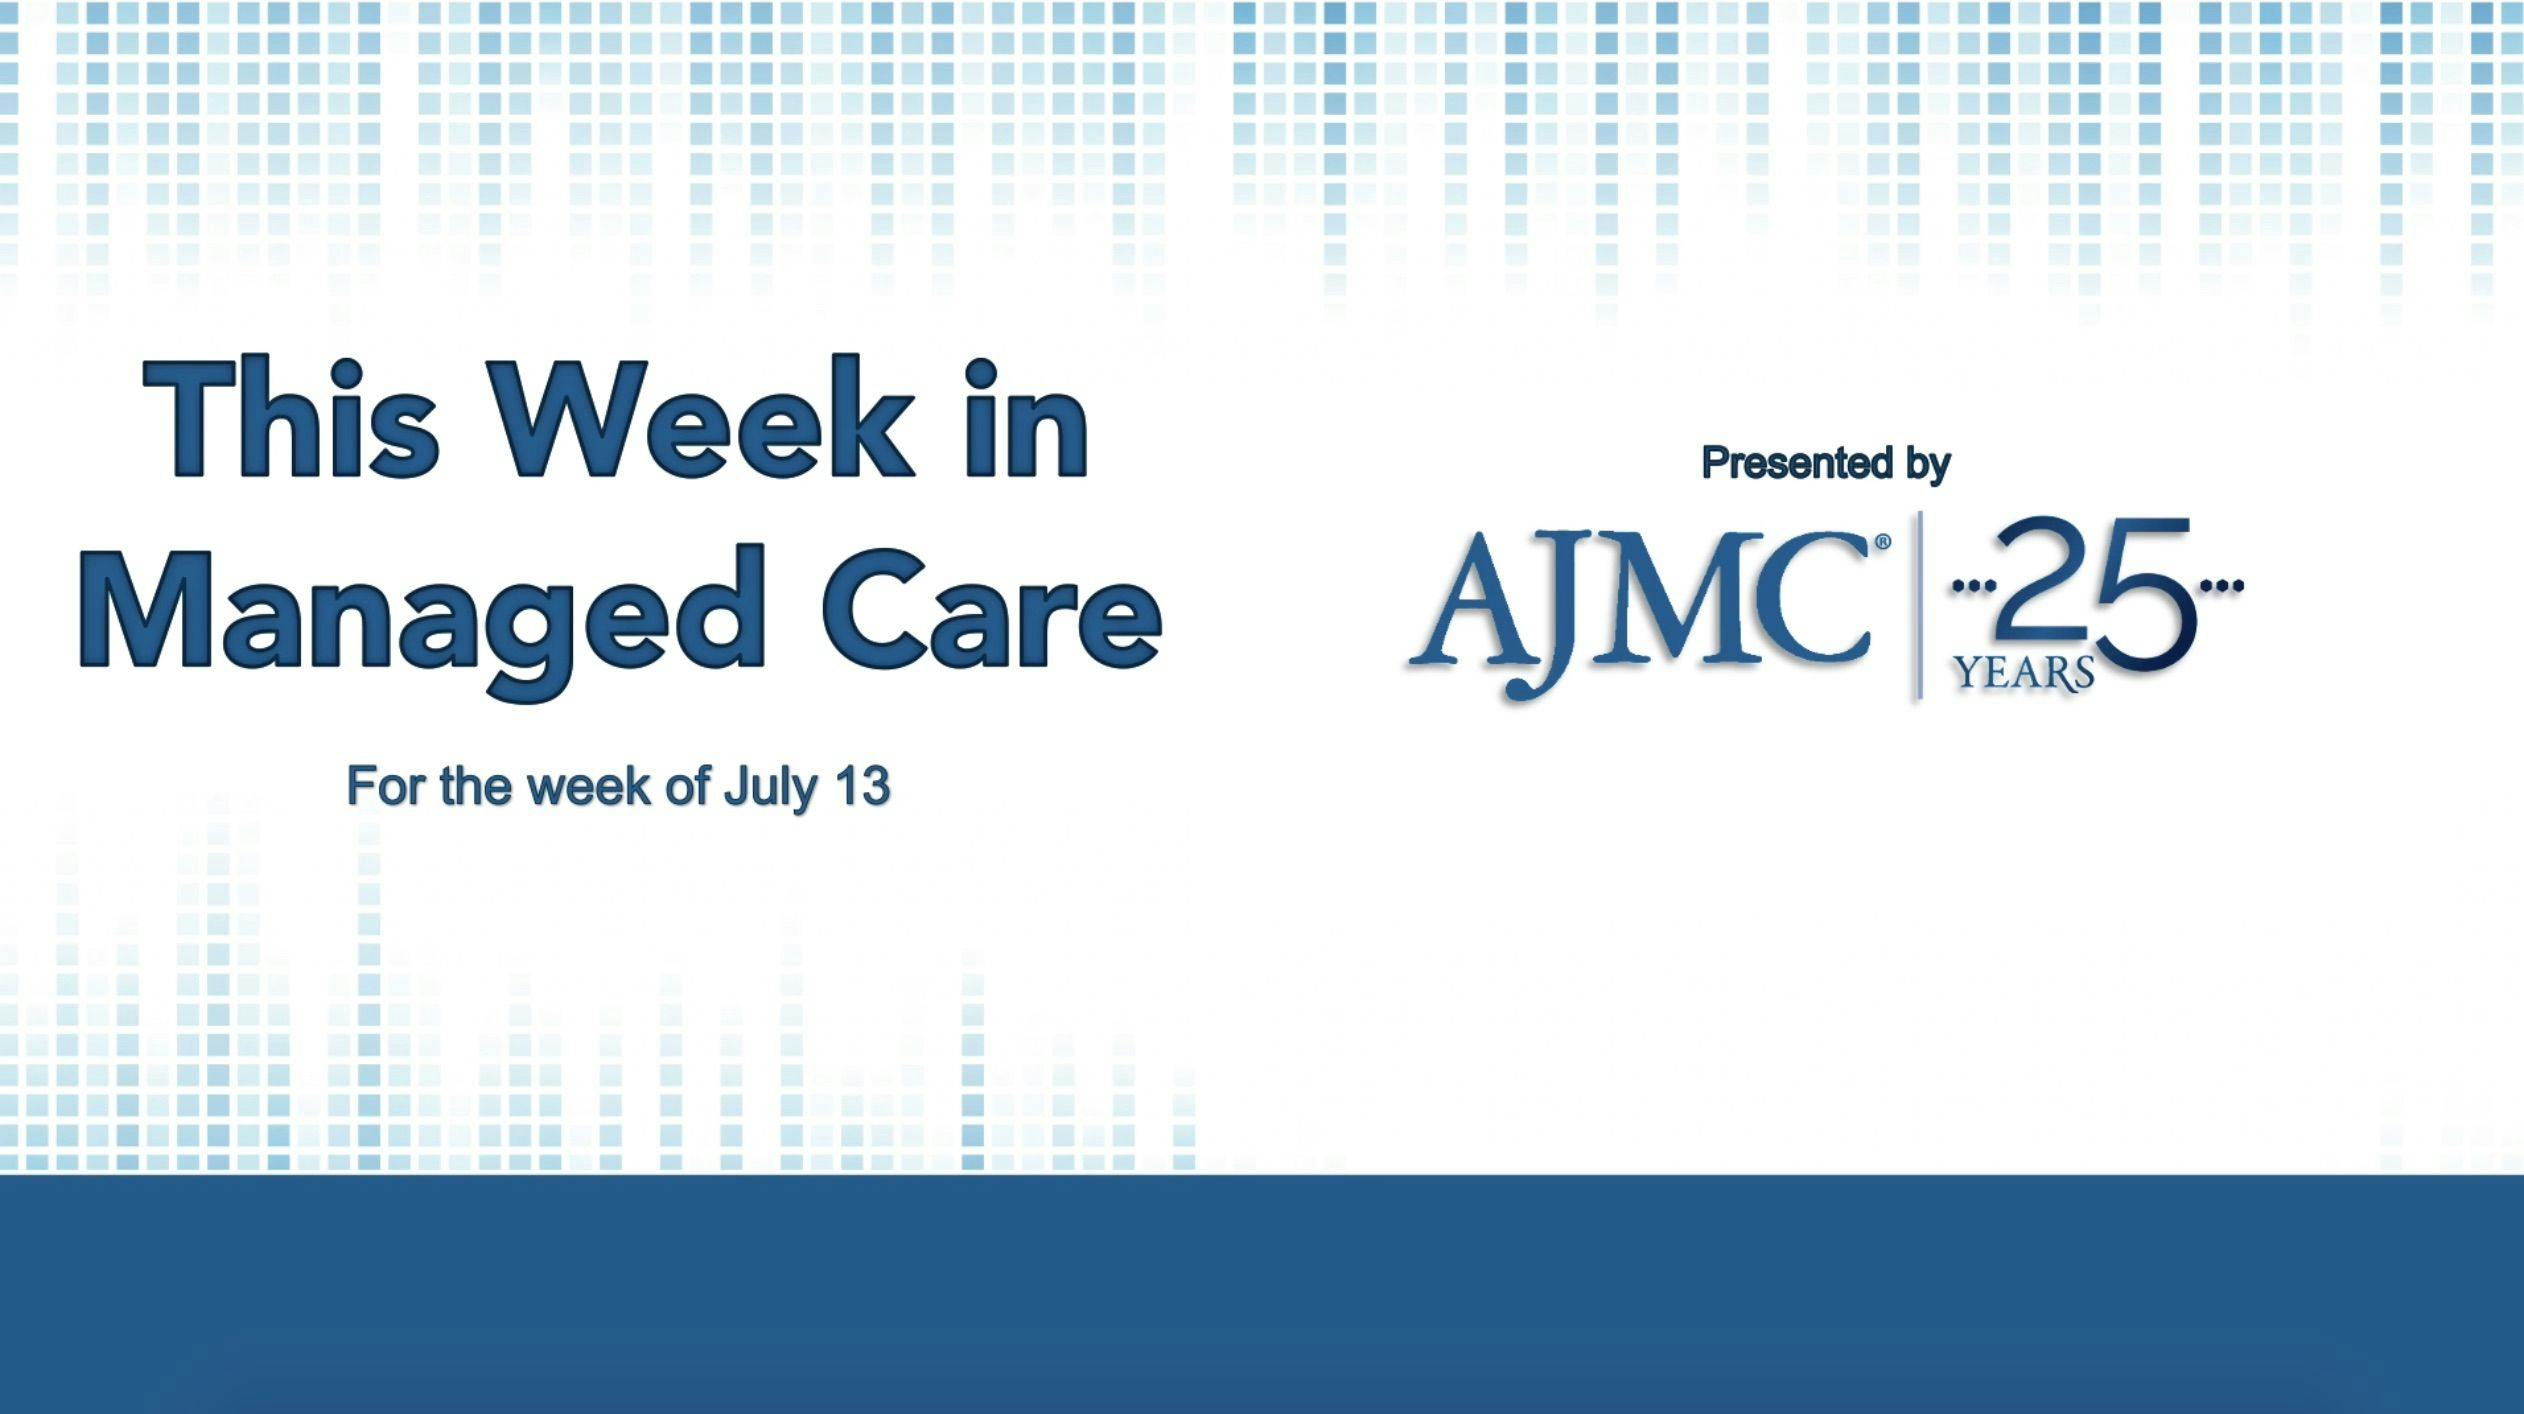 This Week in Managed Care: July 17, 2020